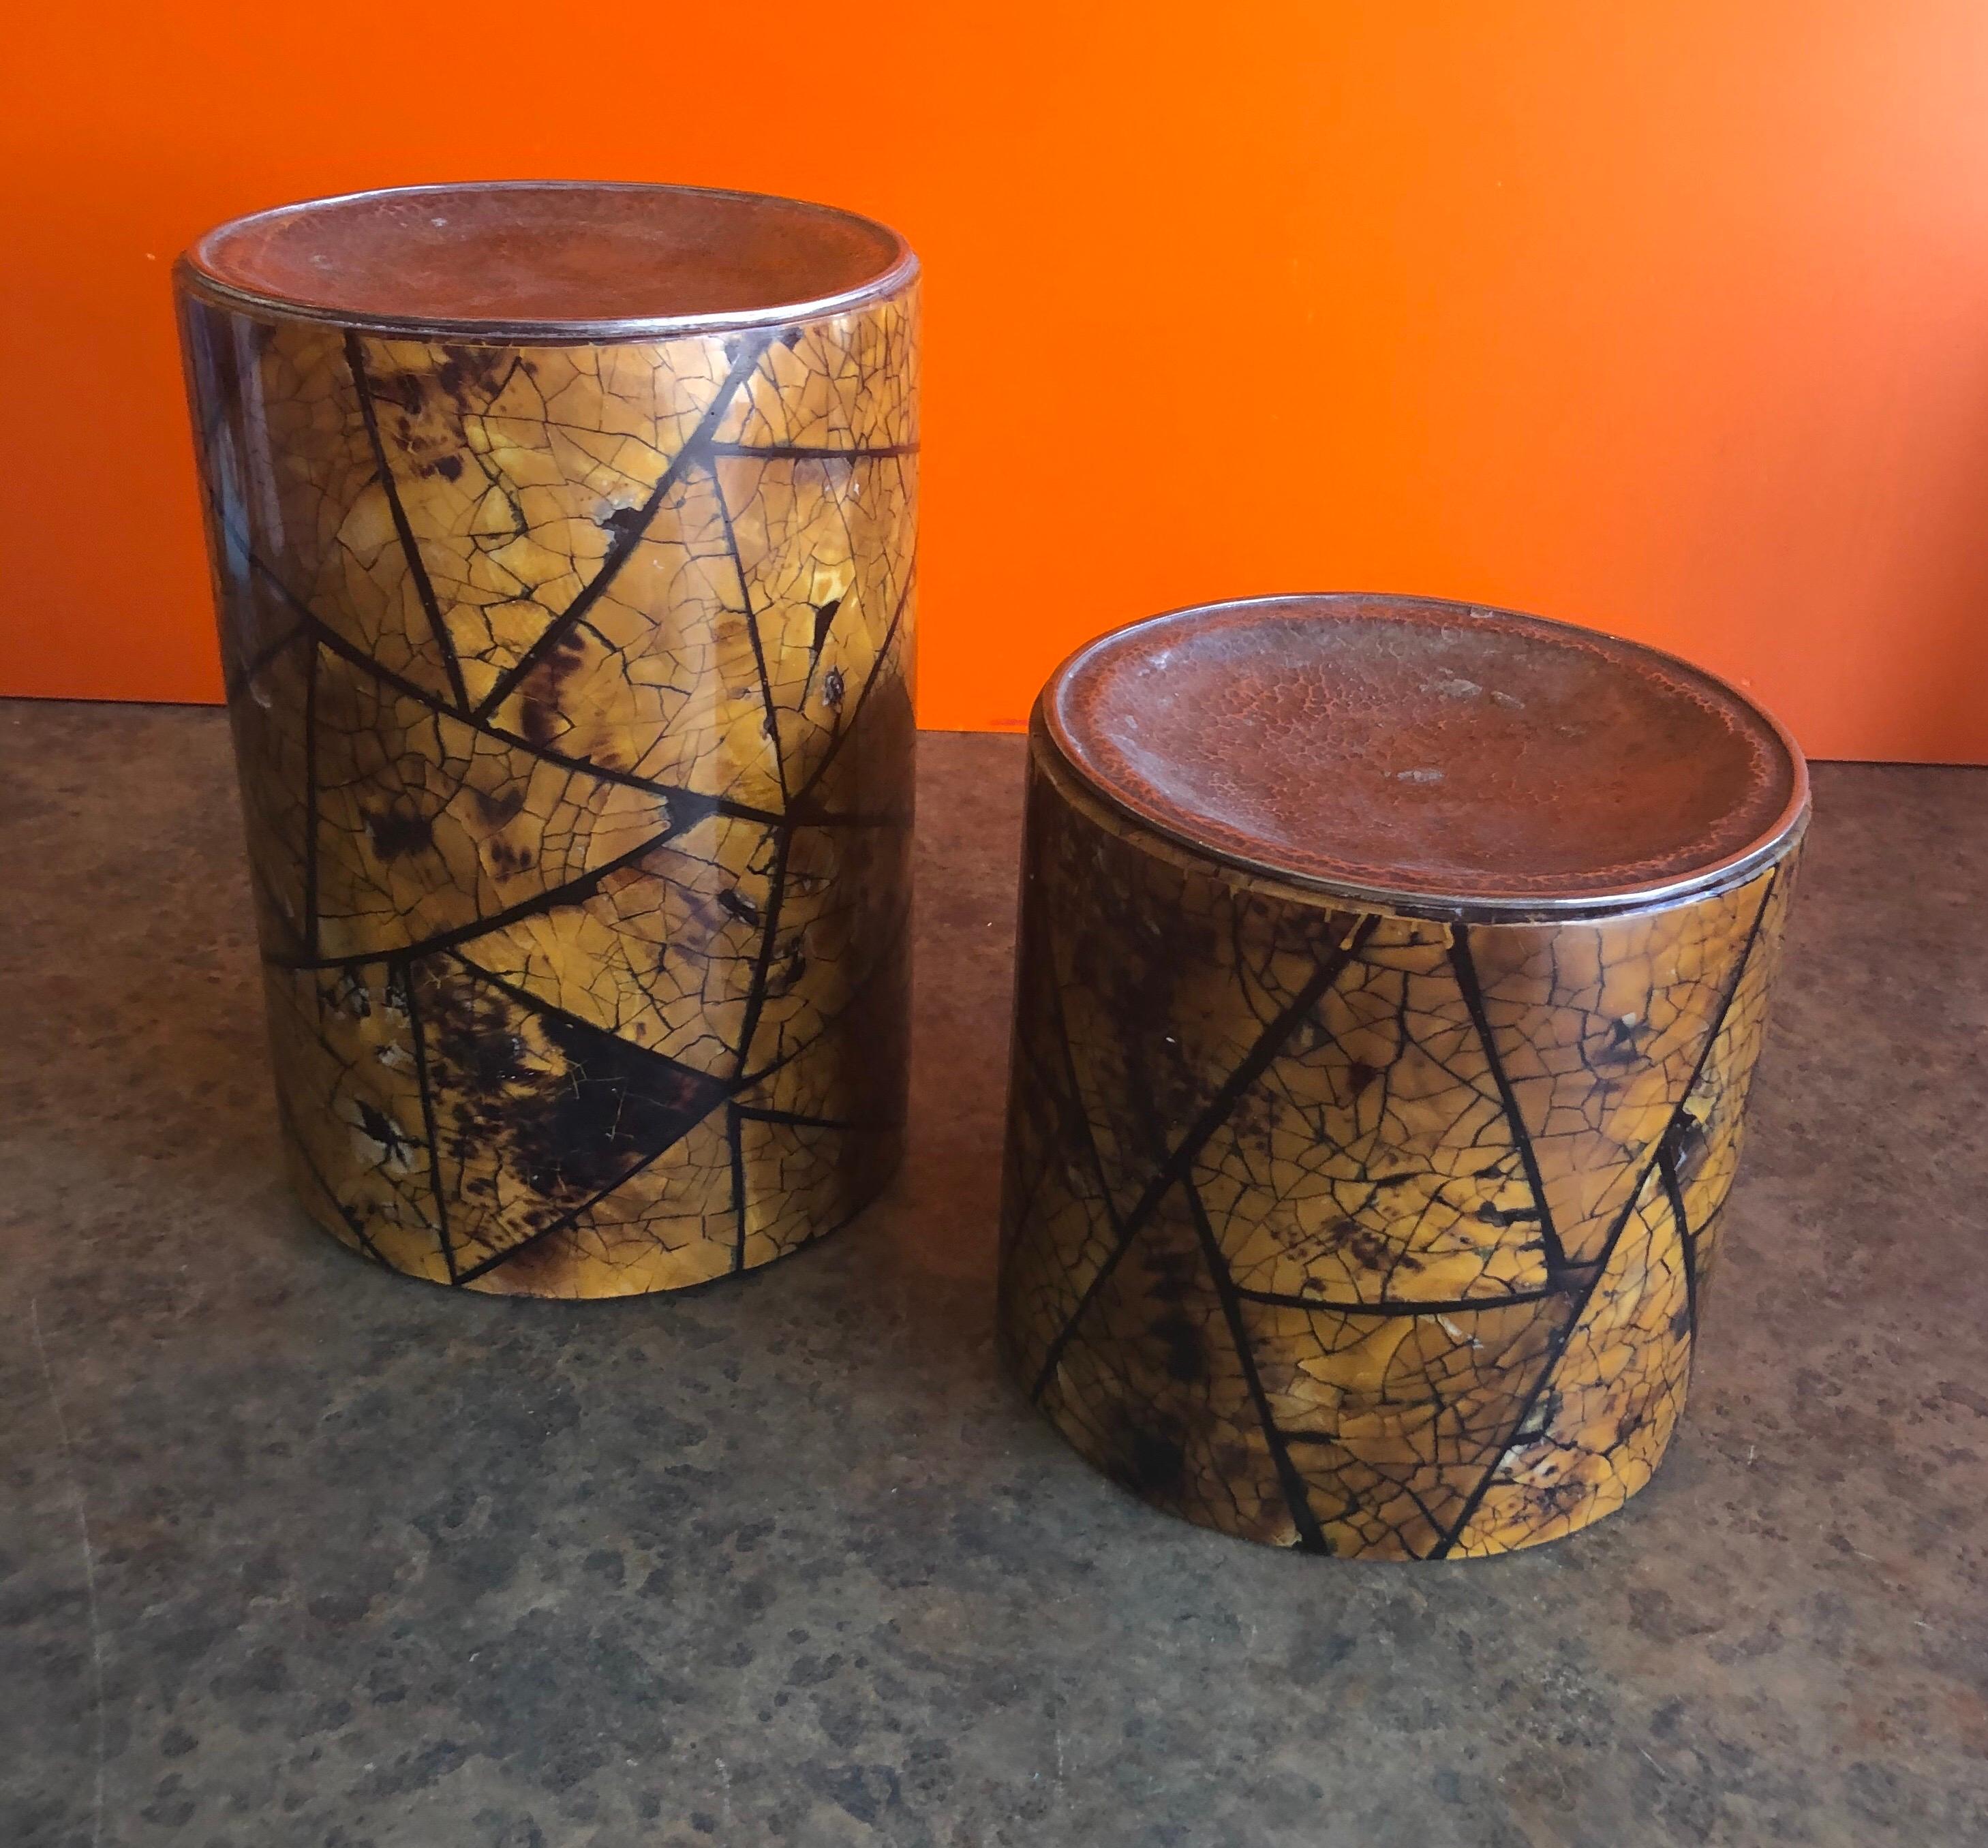 Beautiful pair of large tortoiseshell candle holders by Maitland Smith, circa 1970s, both pieces are 6.375